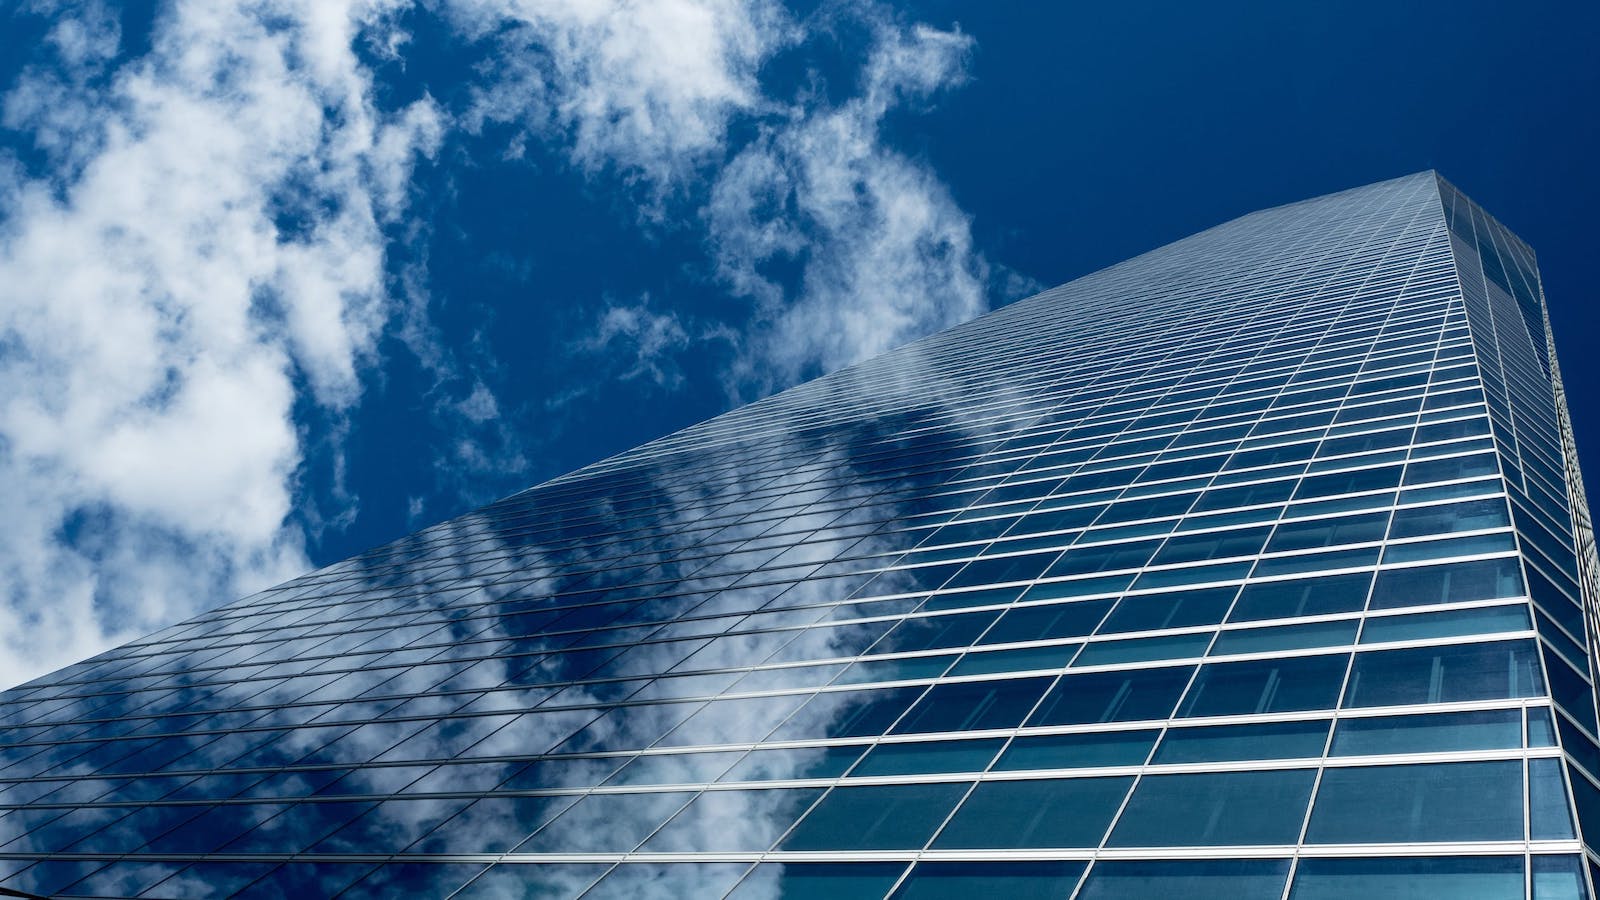 Low angle image of tall glass office buildings against a bright and cloudy sky